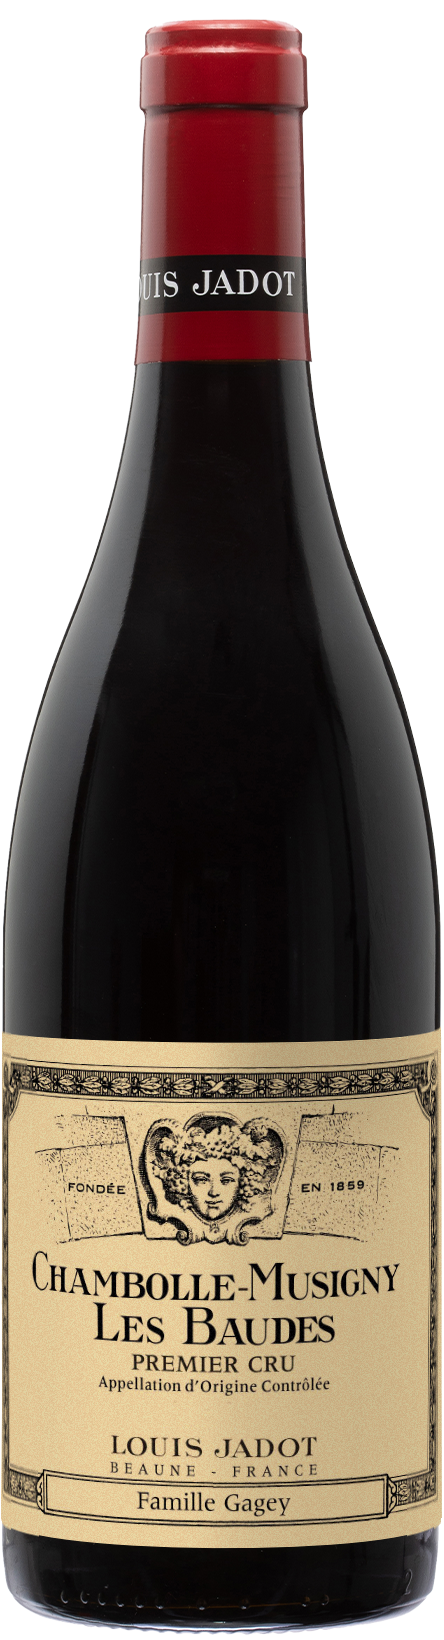 Chambolle-Musigny Les Baudes---2019---Rouge---Louis Jadot---1.5